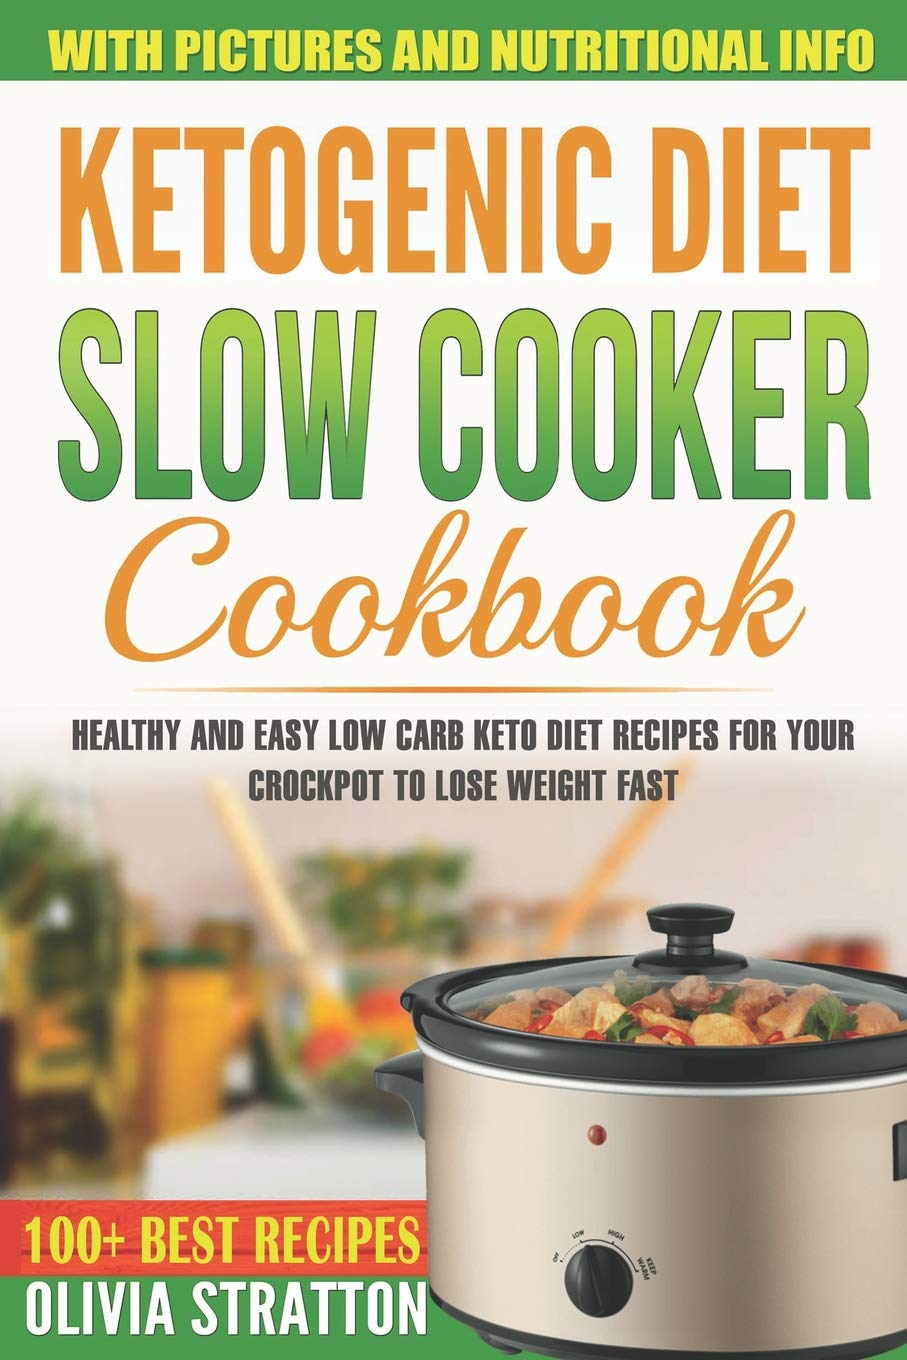 ketogenic diet slow cooker cookbook: healthy and easy low carb keto diet recipes for your crock pot to lose weight fast